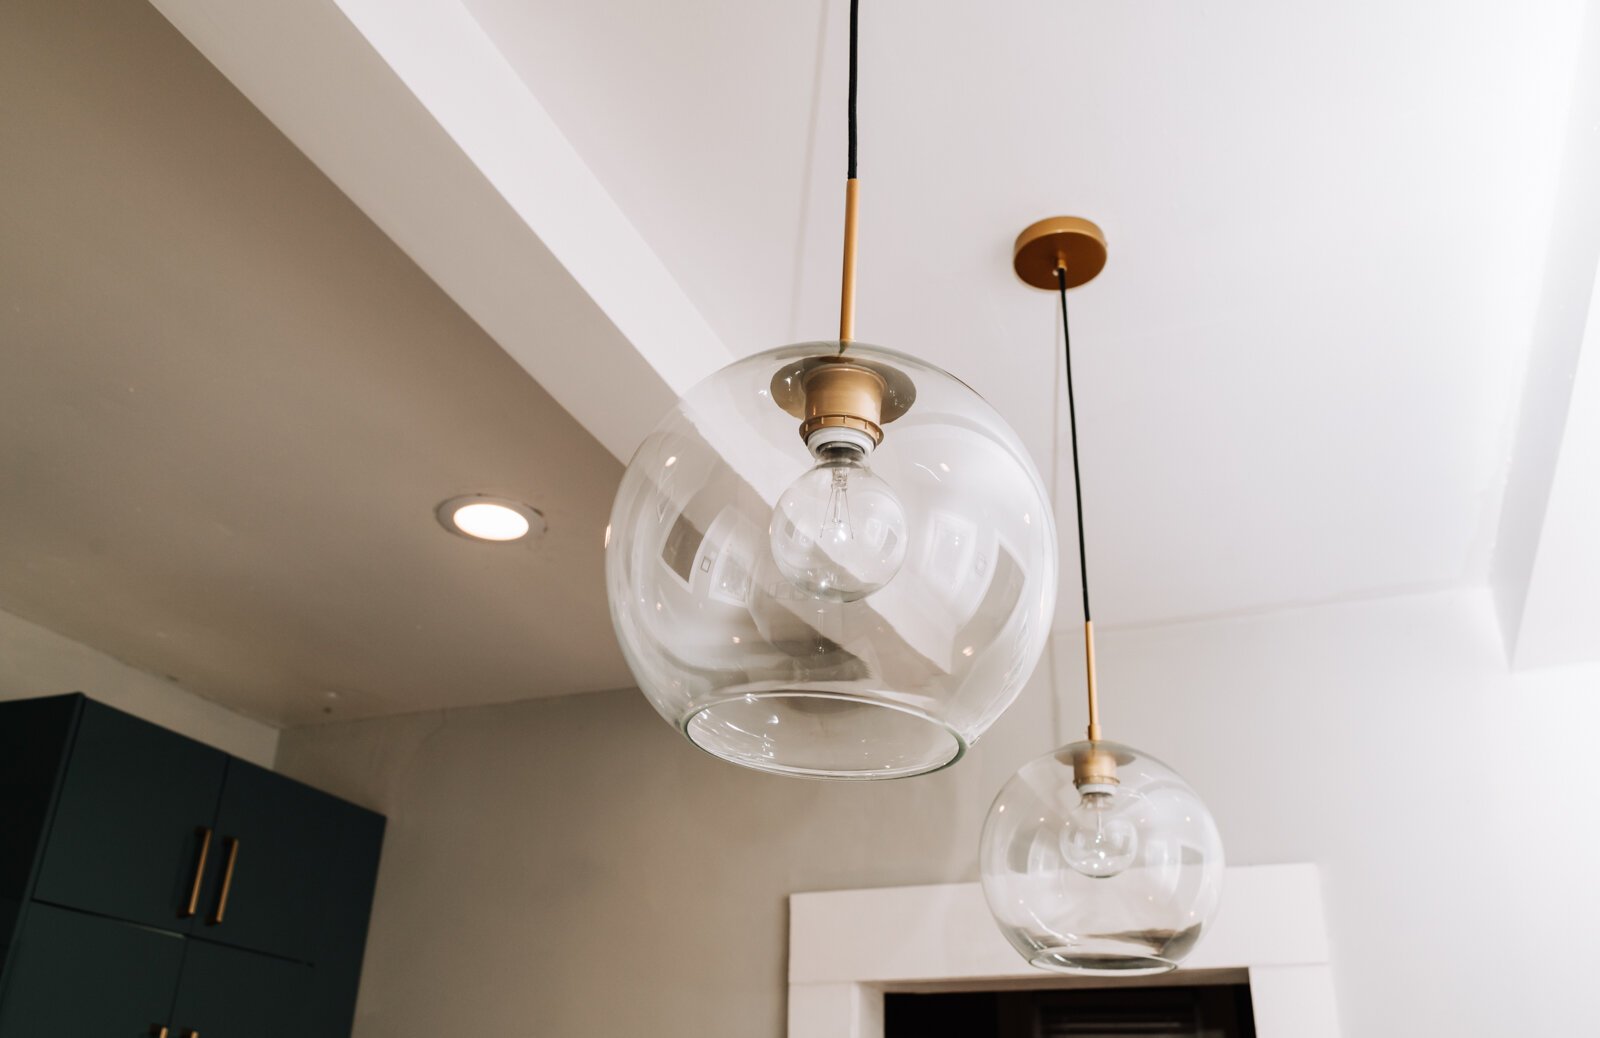 Pendant lighting in the kitchen at the Airbnb.